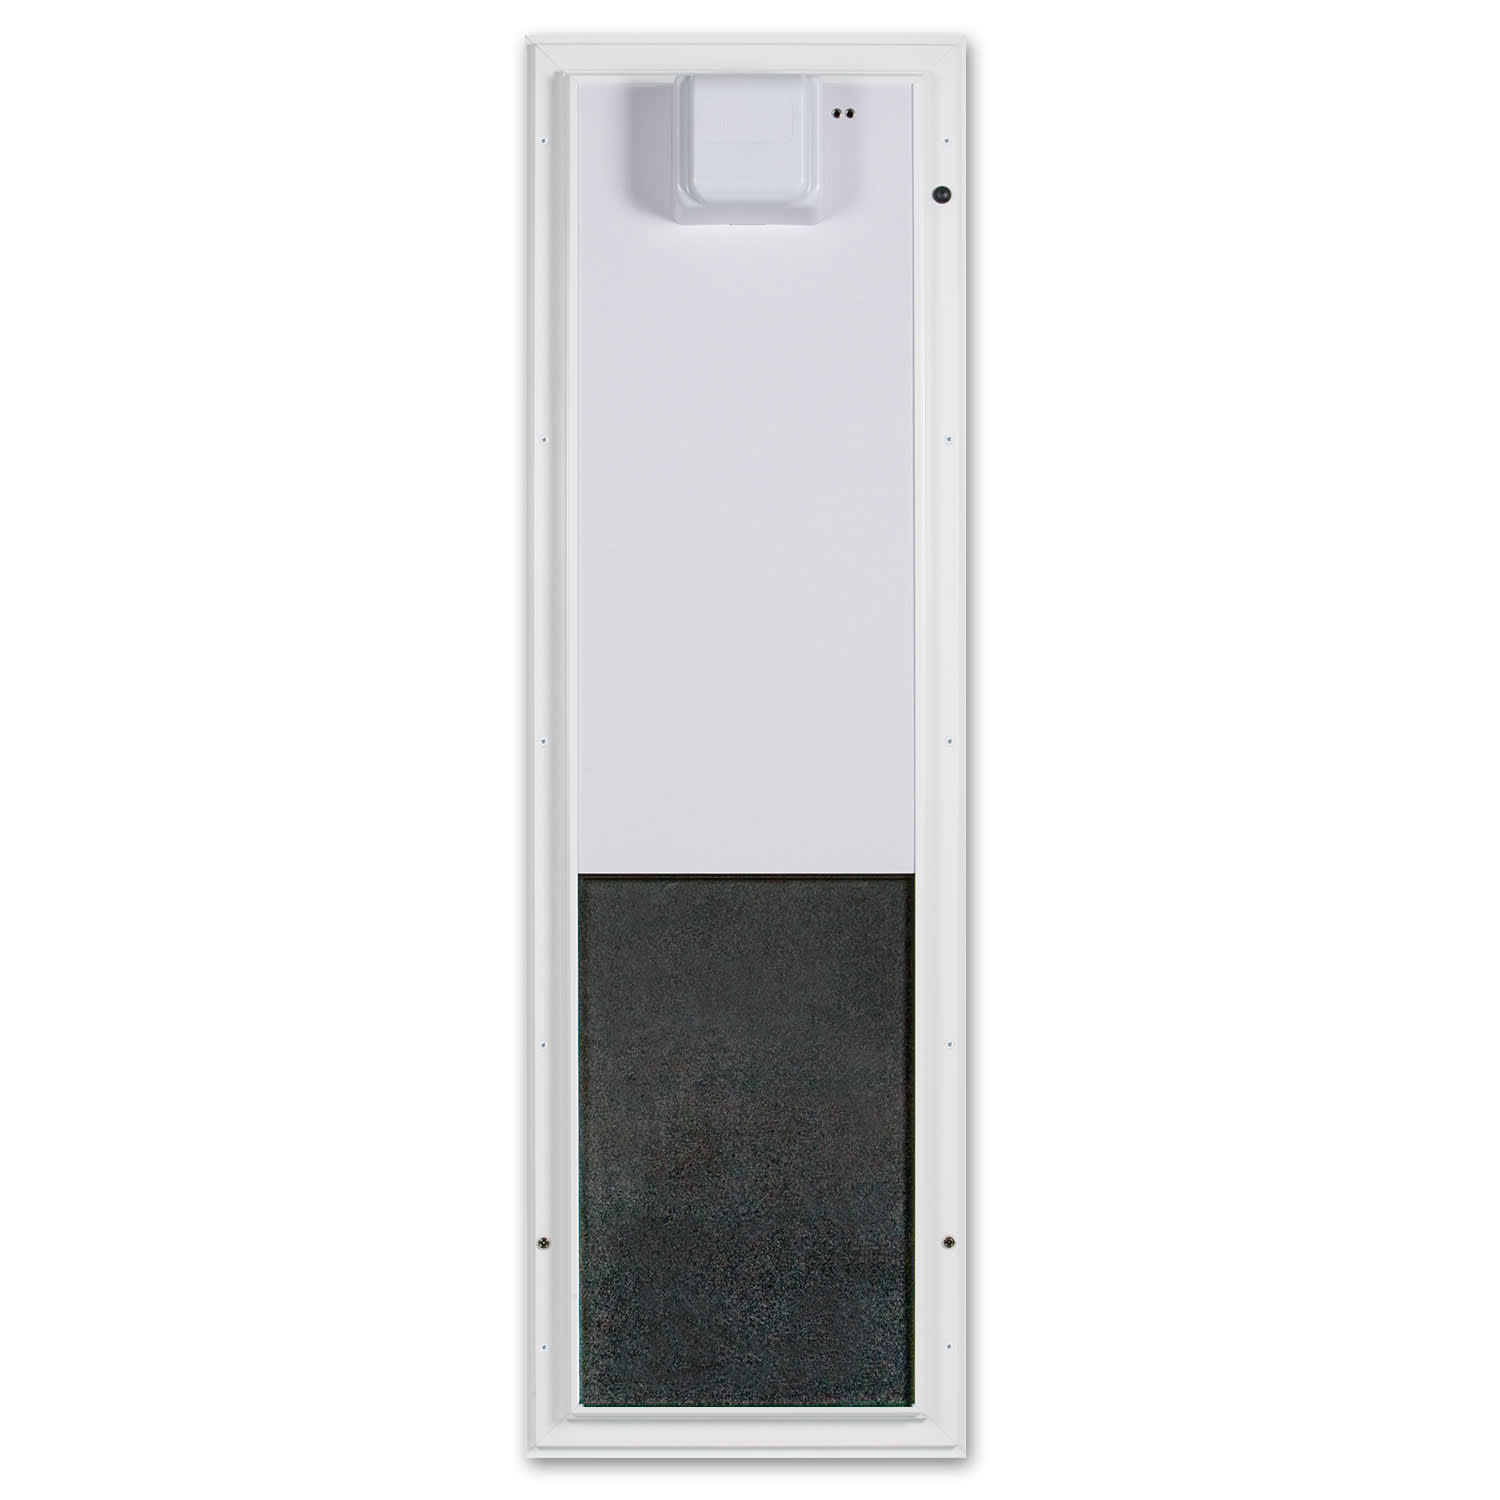 Plexidor Large Wall Mount PDE Electronic Pet Door in White 